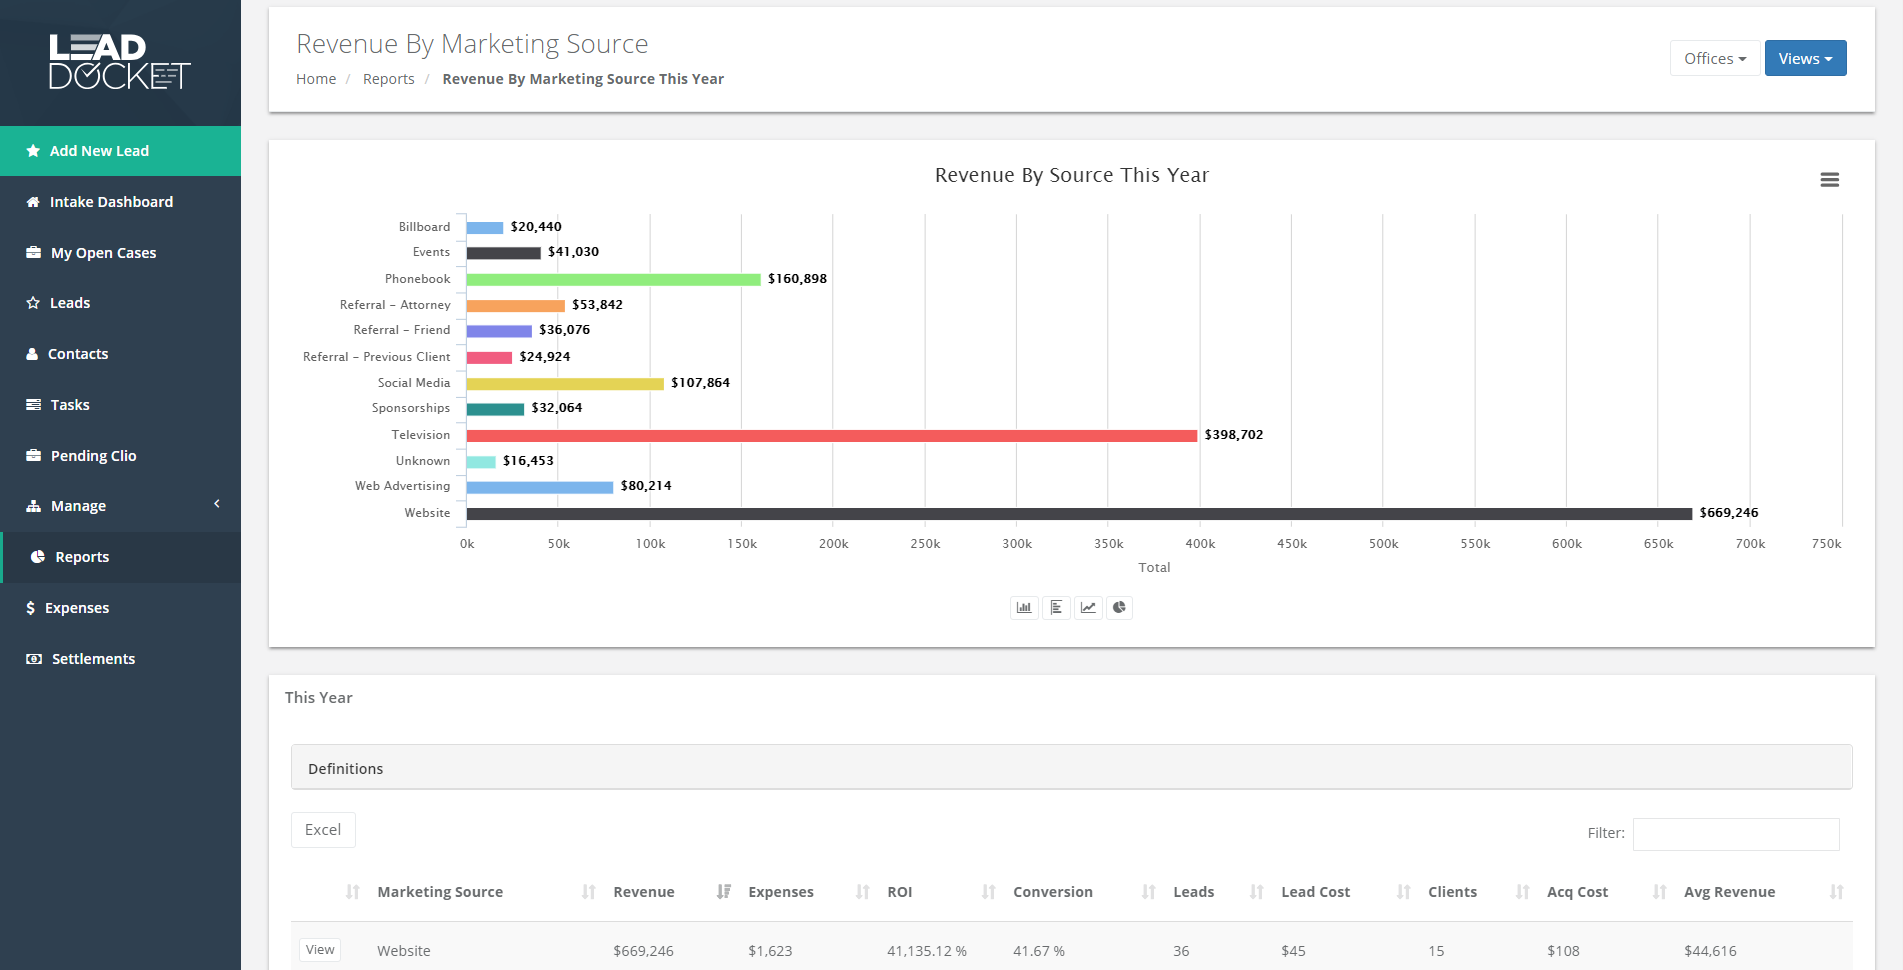 Track your ROI on each marketing channel with Lead Docket's robust reporting and analytics features.